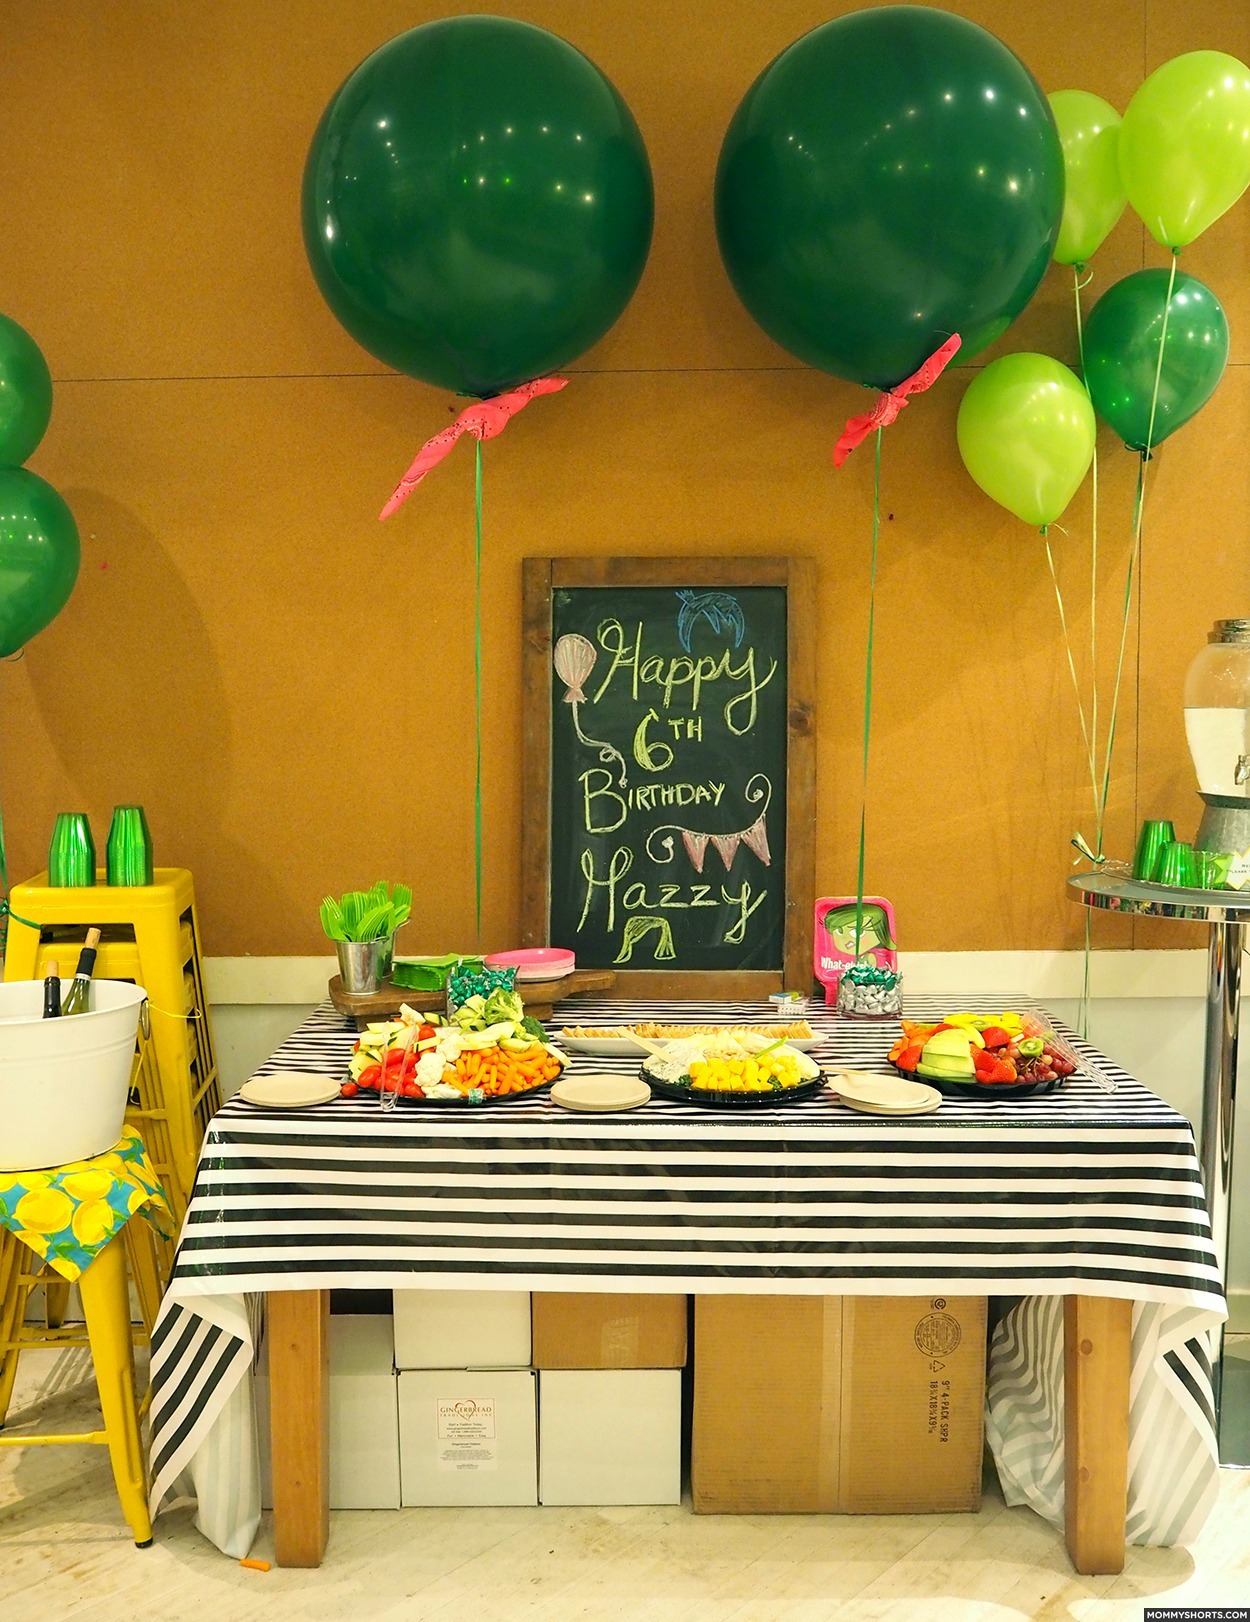 Looking for Inside Out inspired party ideas? Check out this awesome Disgust themed birthday party!